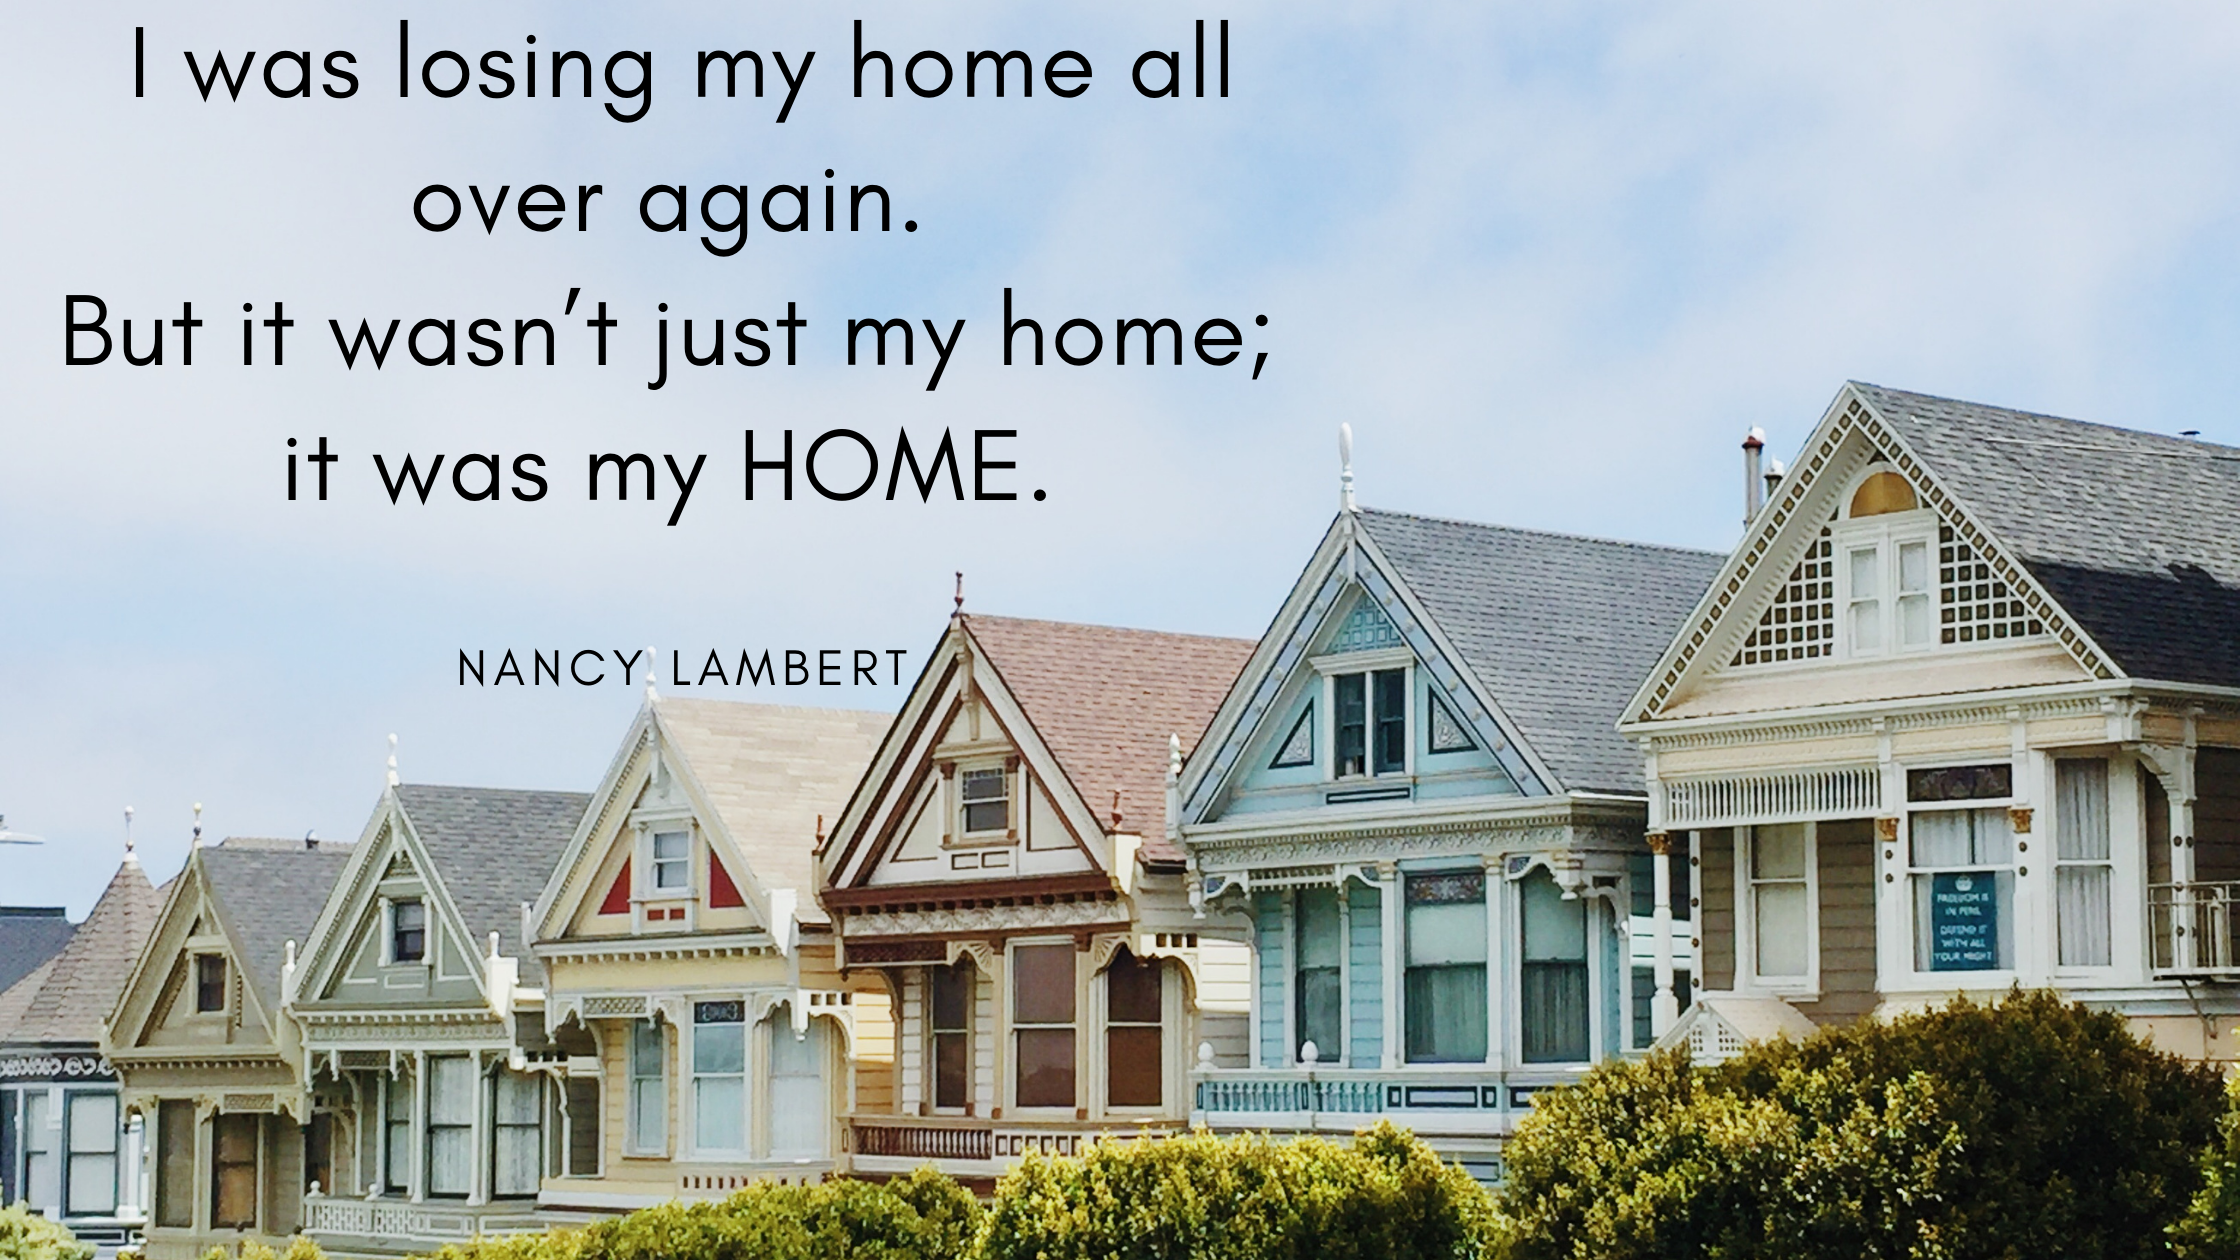 I was losing my home all over again. But it wasn’t just my home; it was my HOME.